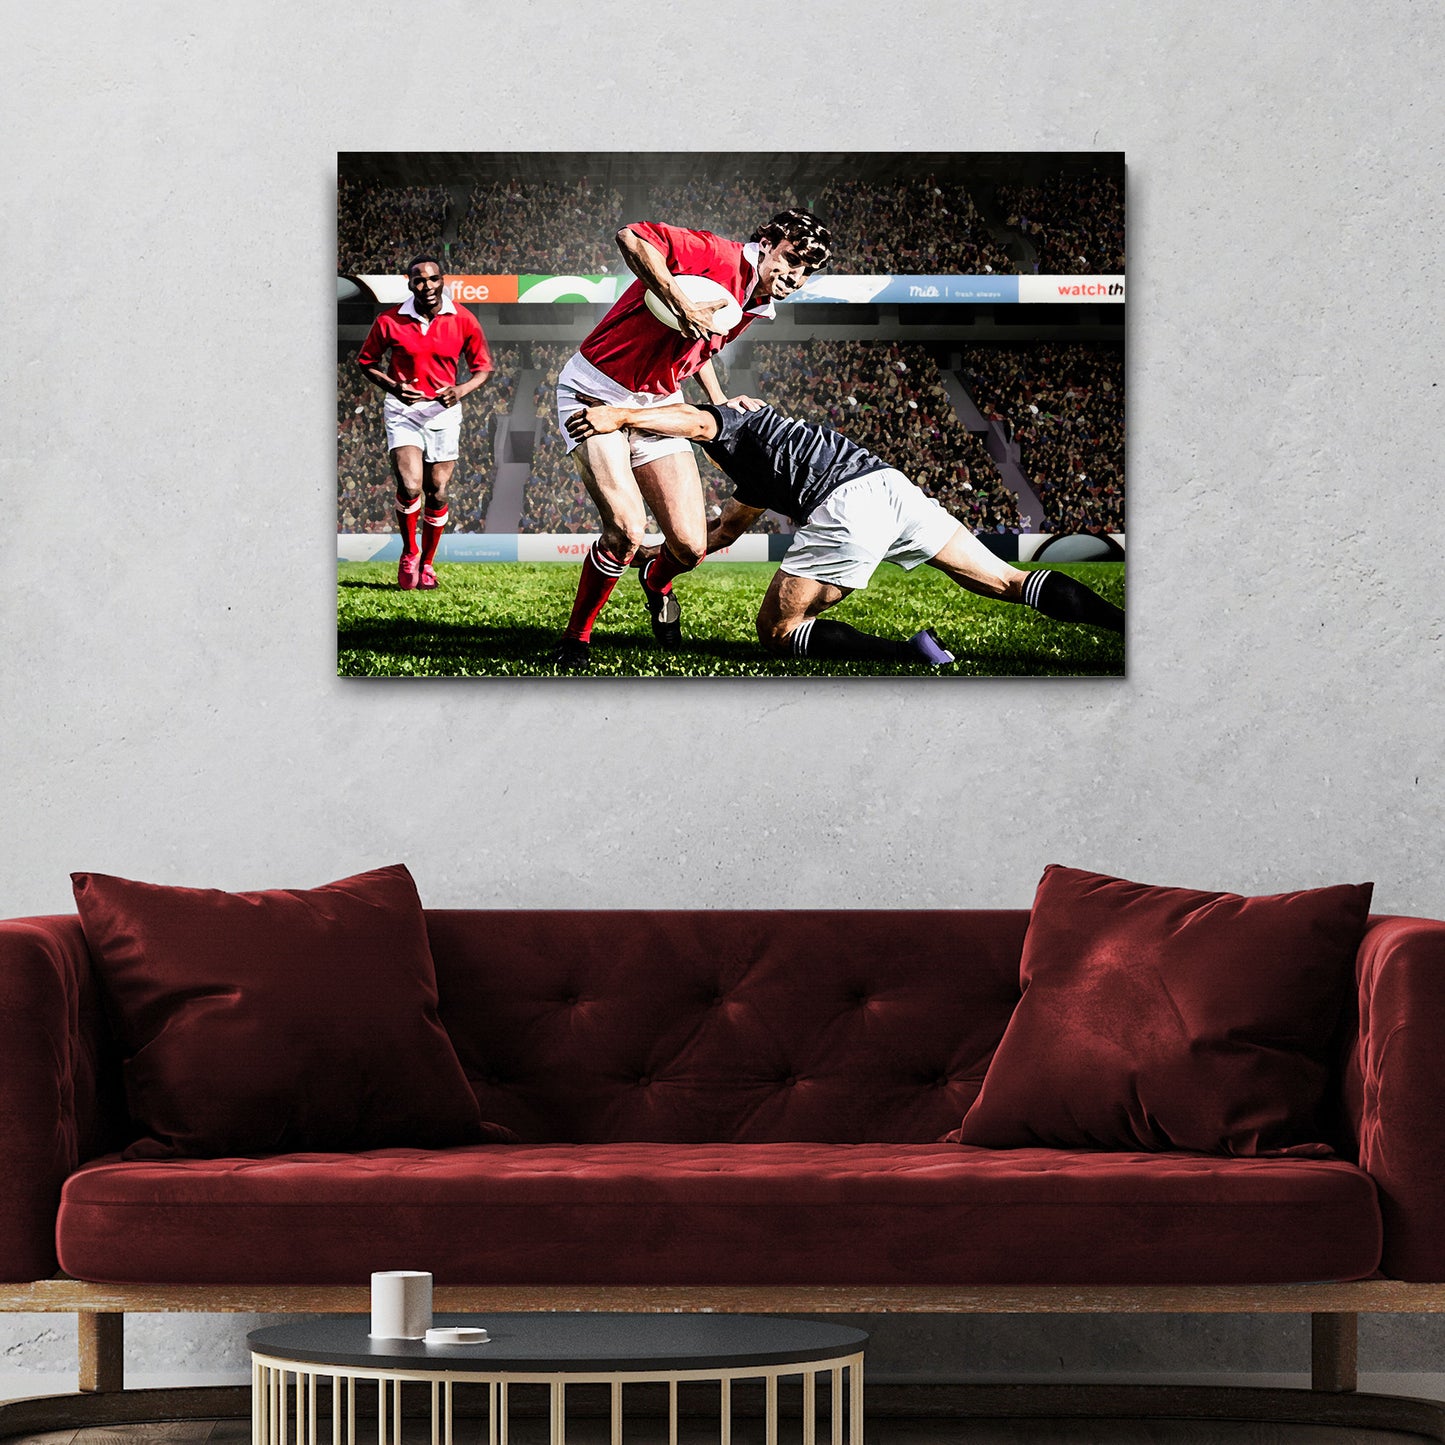 Rugby Match Canvas Wall Art - Image by Tailored Canvases